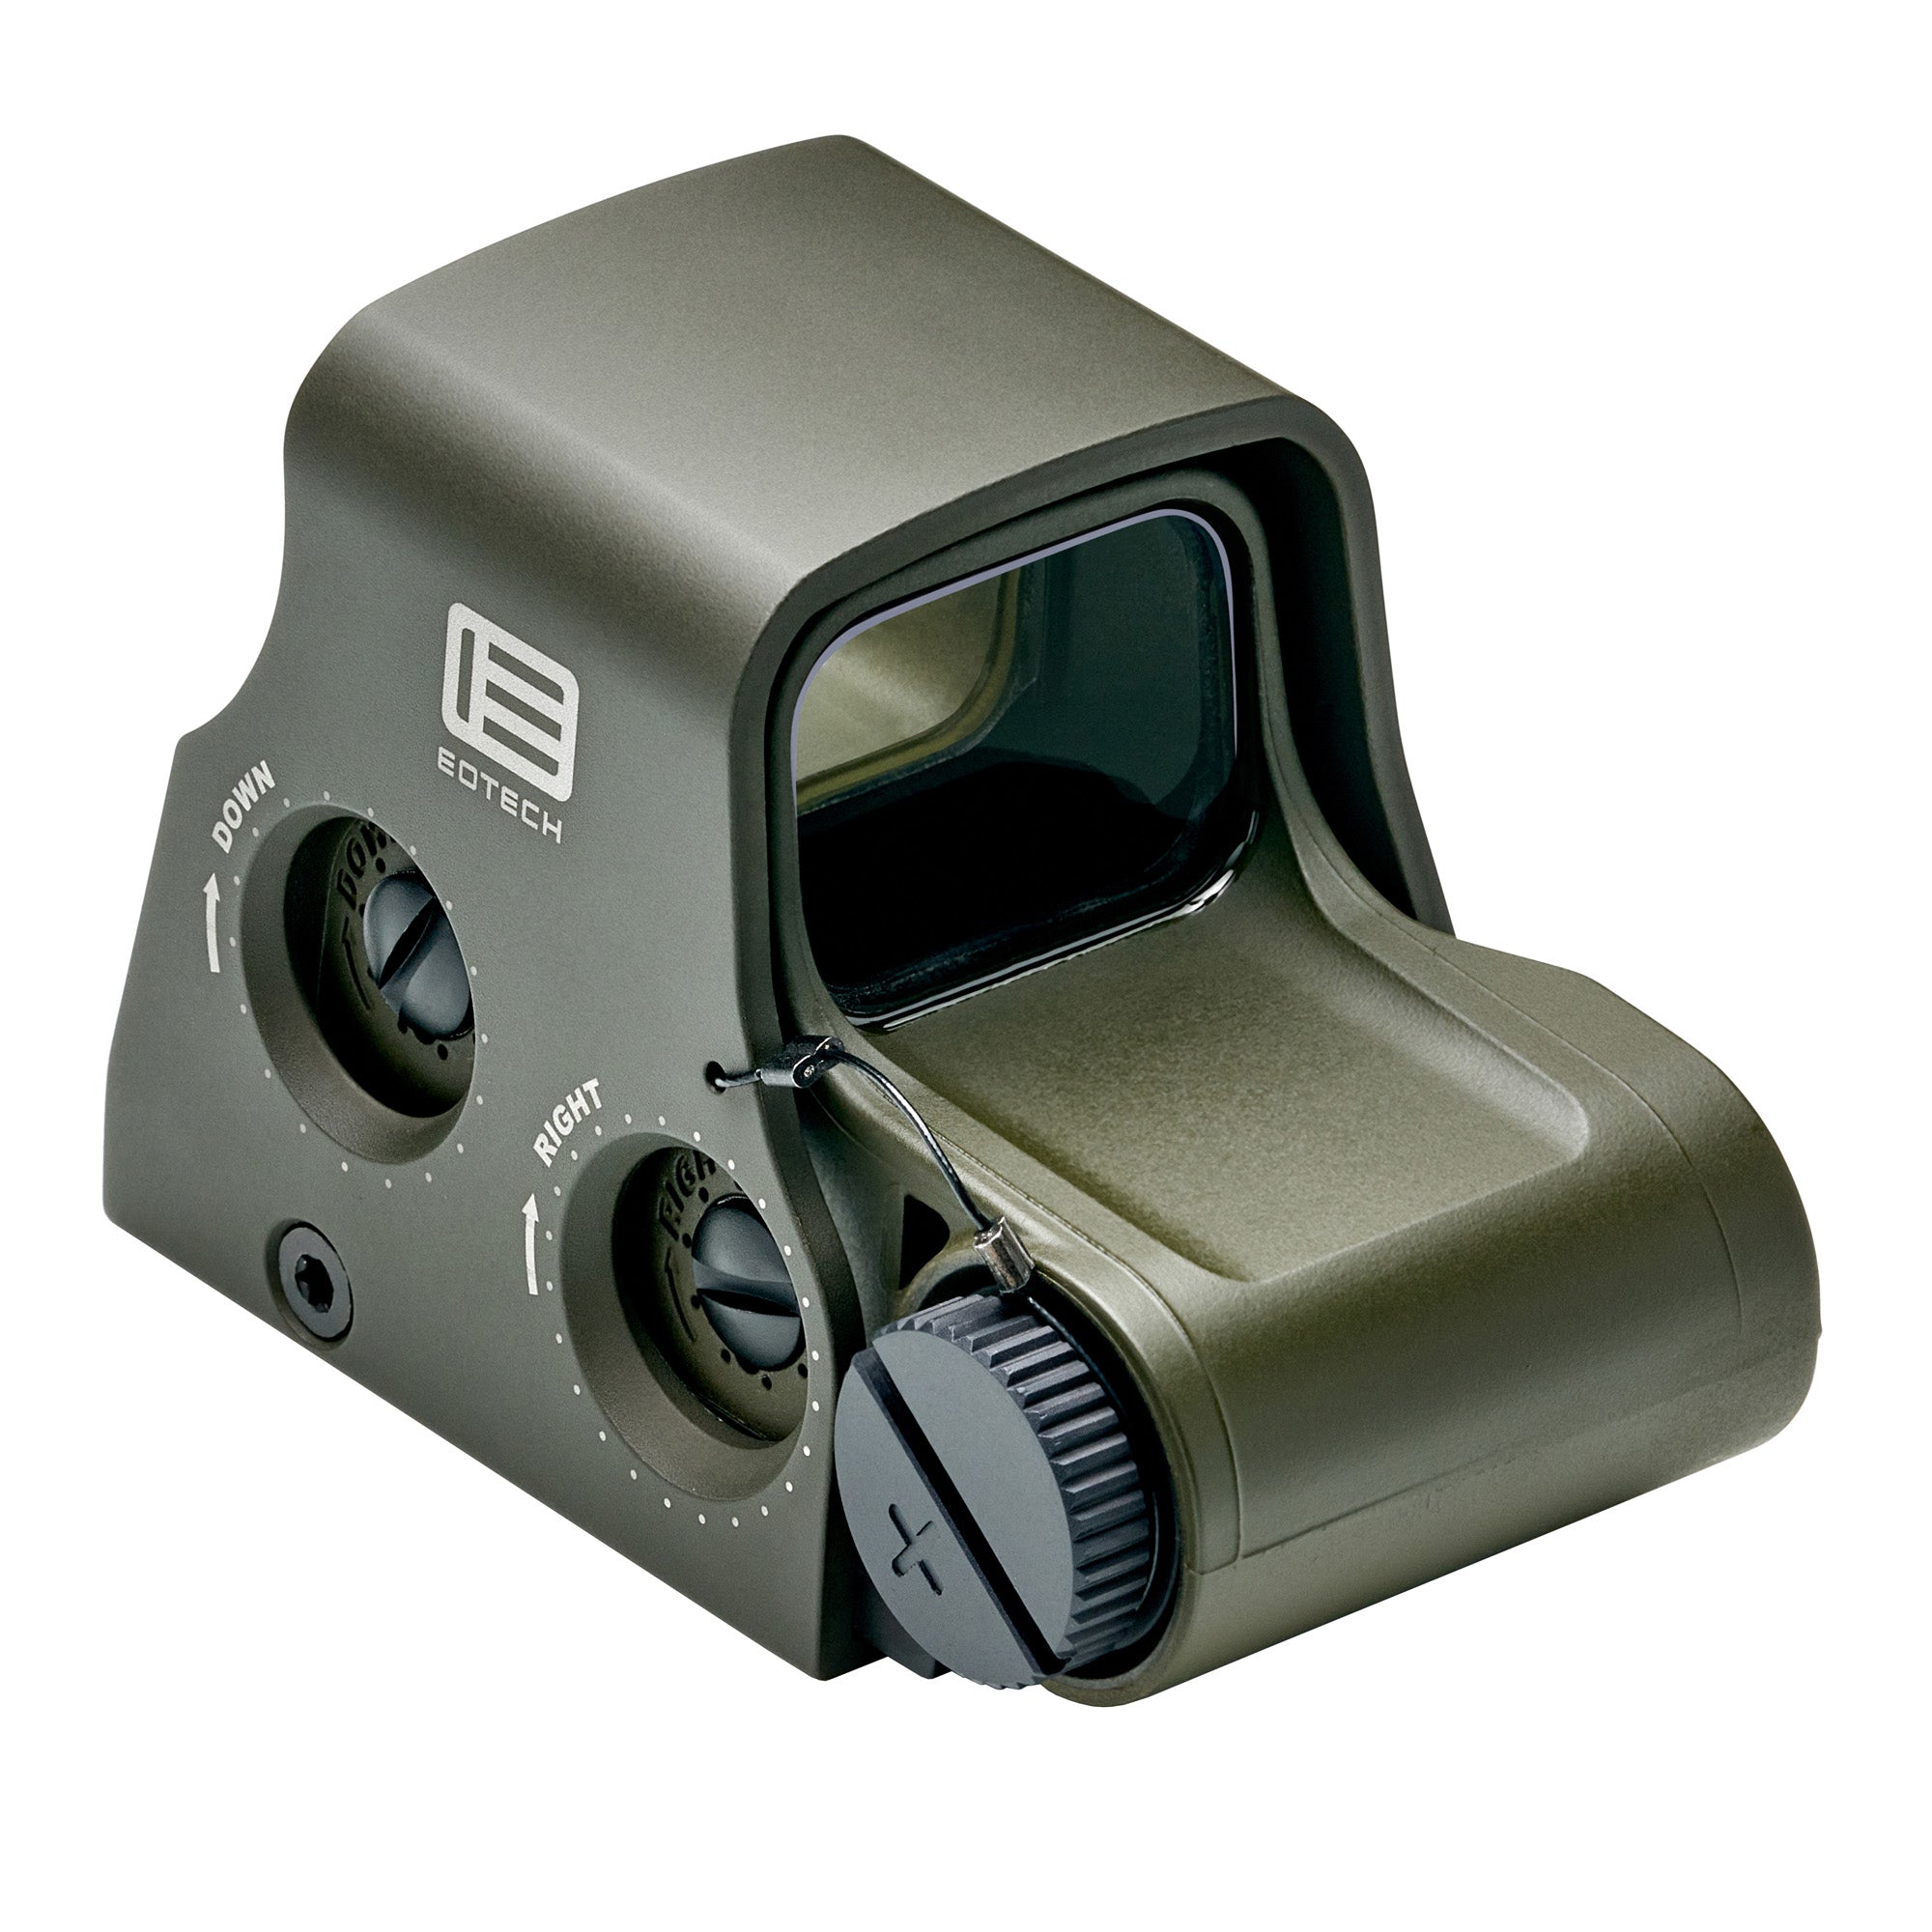 EOTech XPS2 Holographic Sight in Olive Drab Green with Red Reticle, featuring a 68MOA ring and 1MOA dot for precise targeting